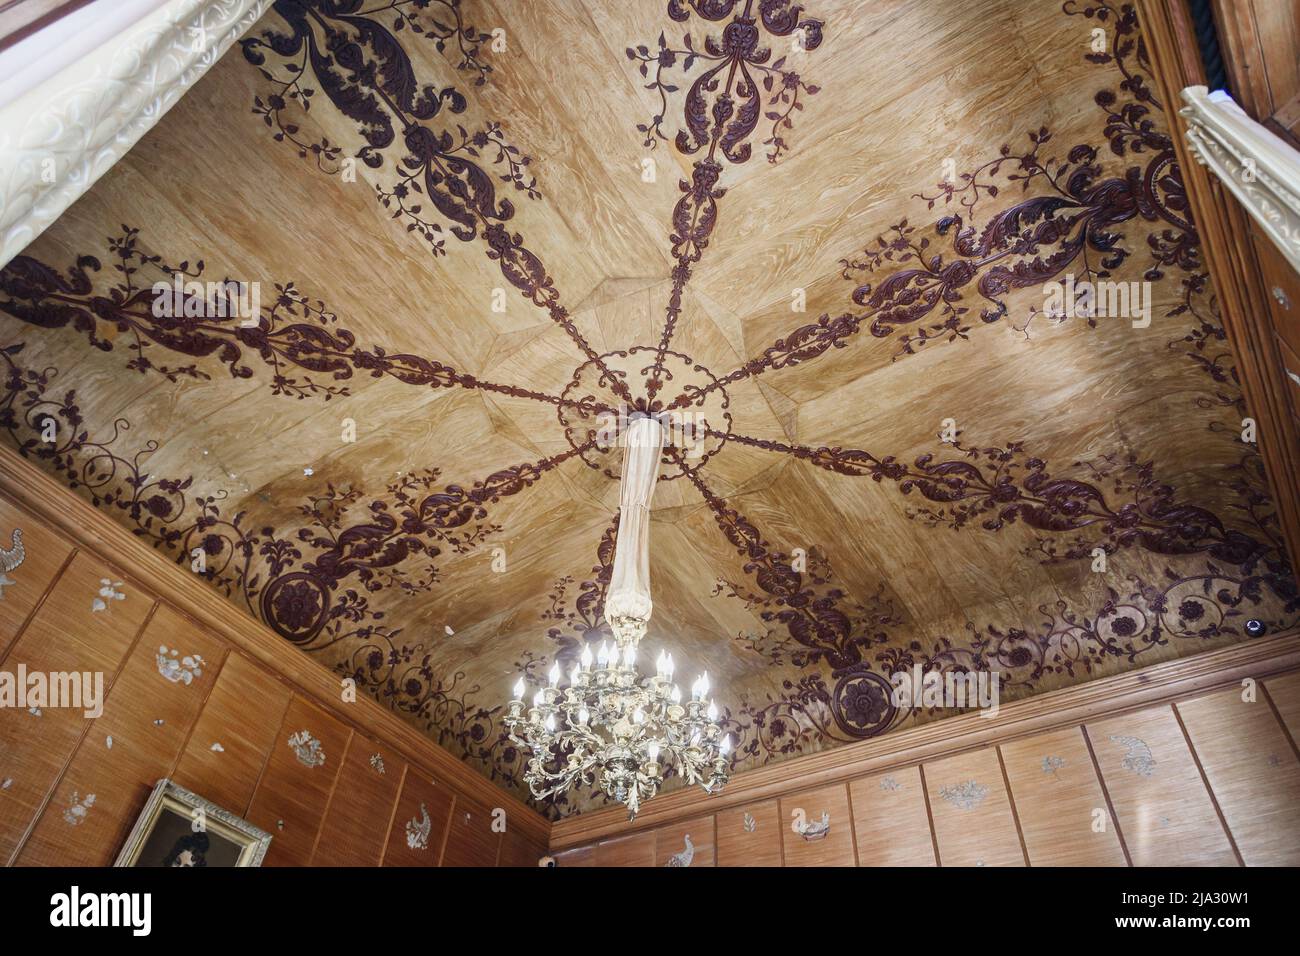 Alupka, Crimea - March 19, 2021: Ceiling of China cabinet in Vorontsov Palace Stock Photo